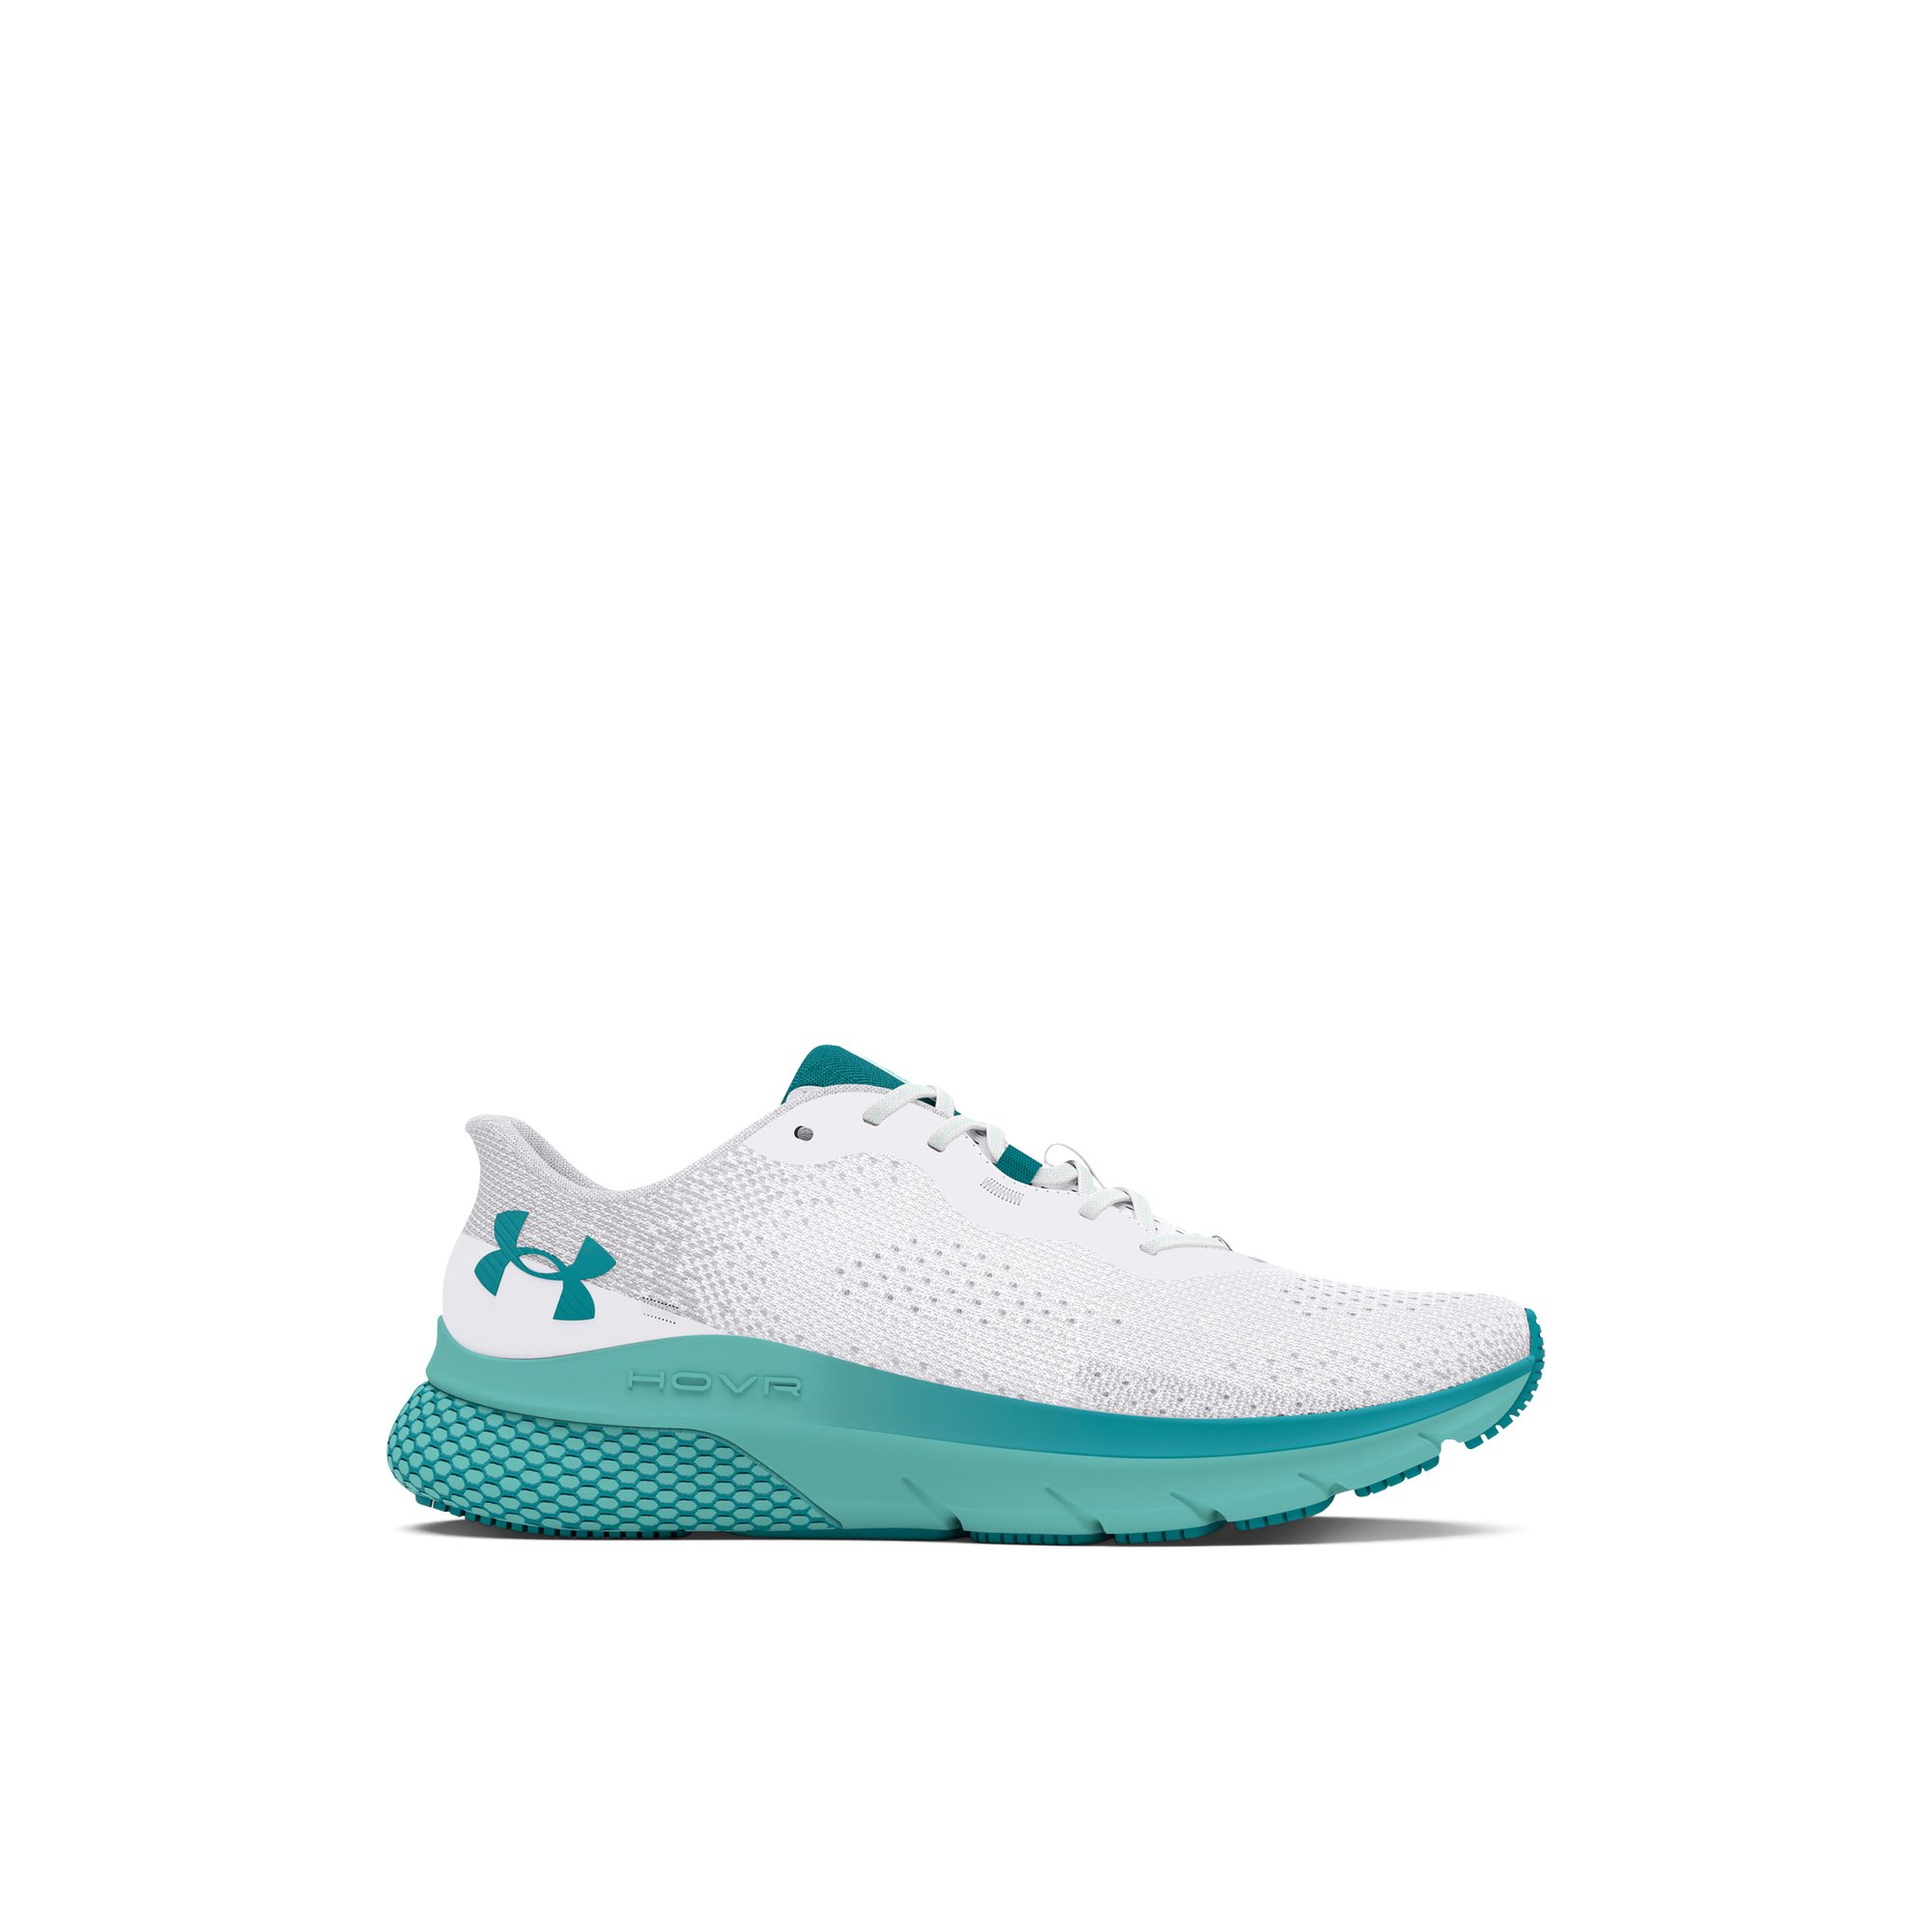 Under Armour Turbulence 2 - Women's Shoes White